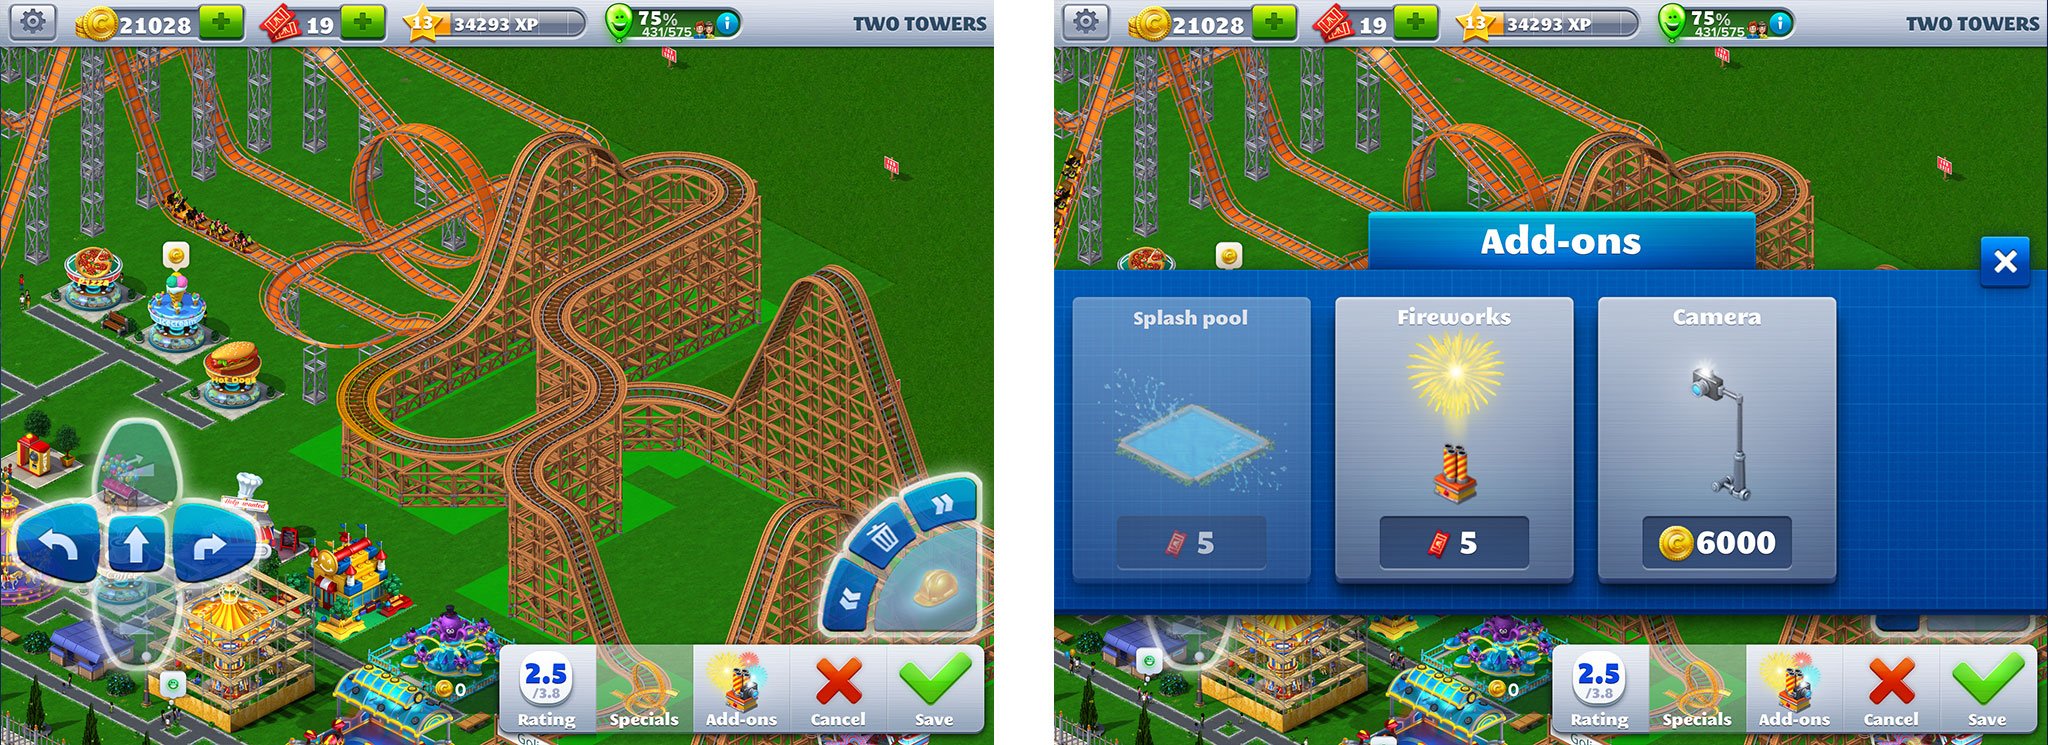 Roller Coaster Tycoon 4 Top 10 Tips Hints And Cheats You Need To Know Imore